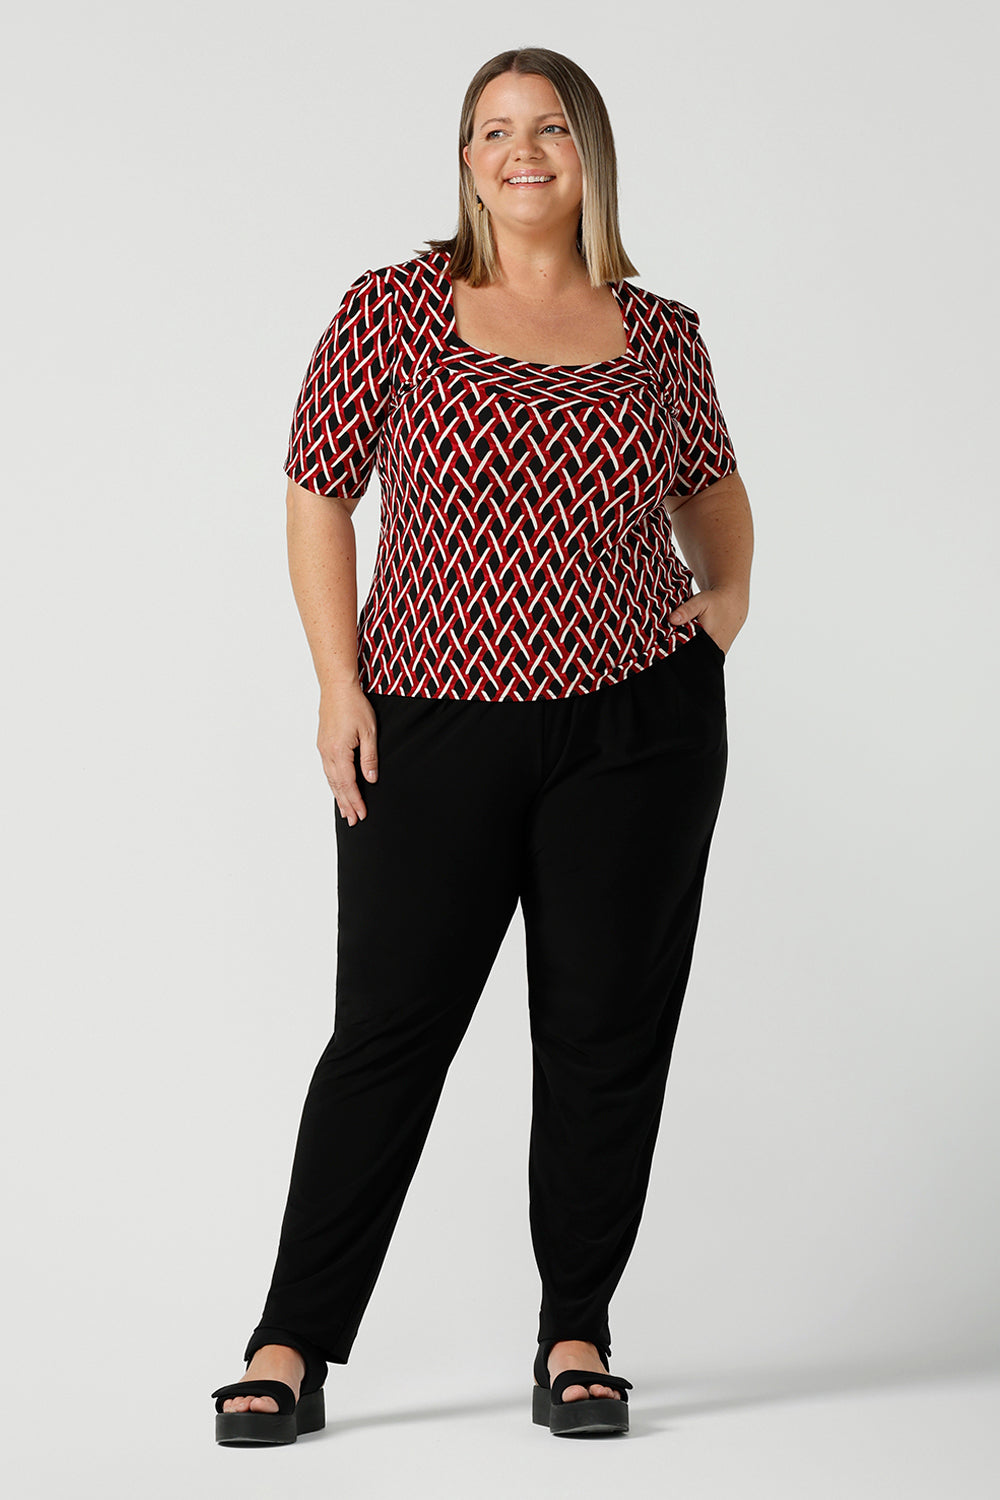 Curvy size 16 woman wears a geometric Chevron print Berni top. Corporate causal work wear top that is comfortable and versatile. Styled back with Black Indi pants. Made in Australia for women size 8 - 24.